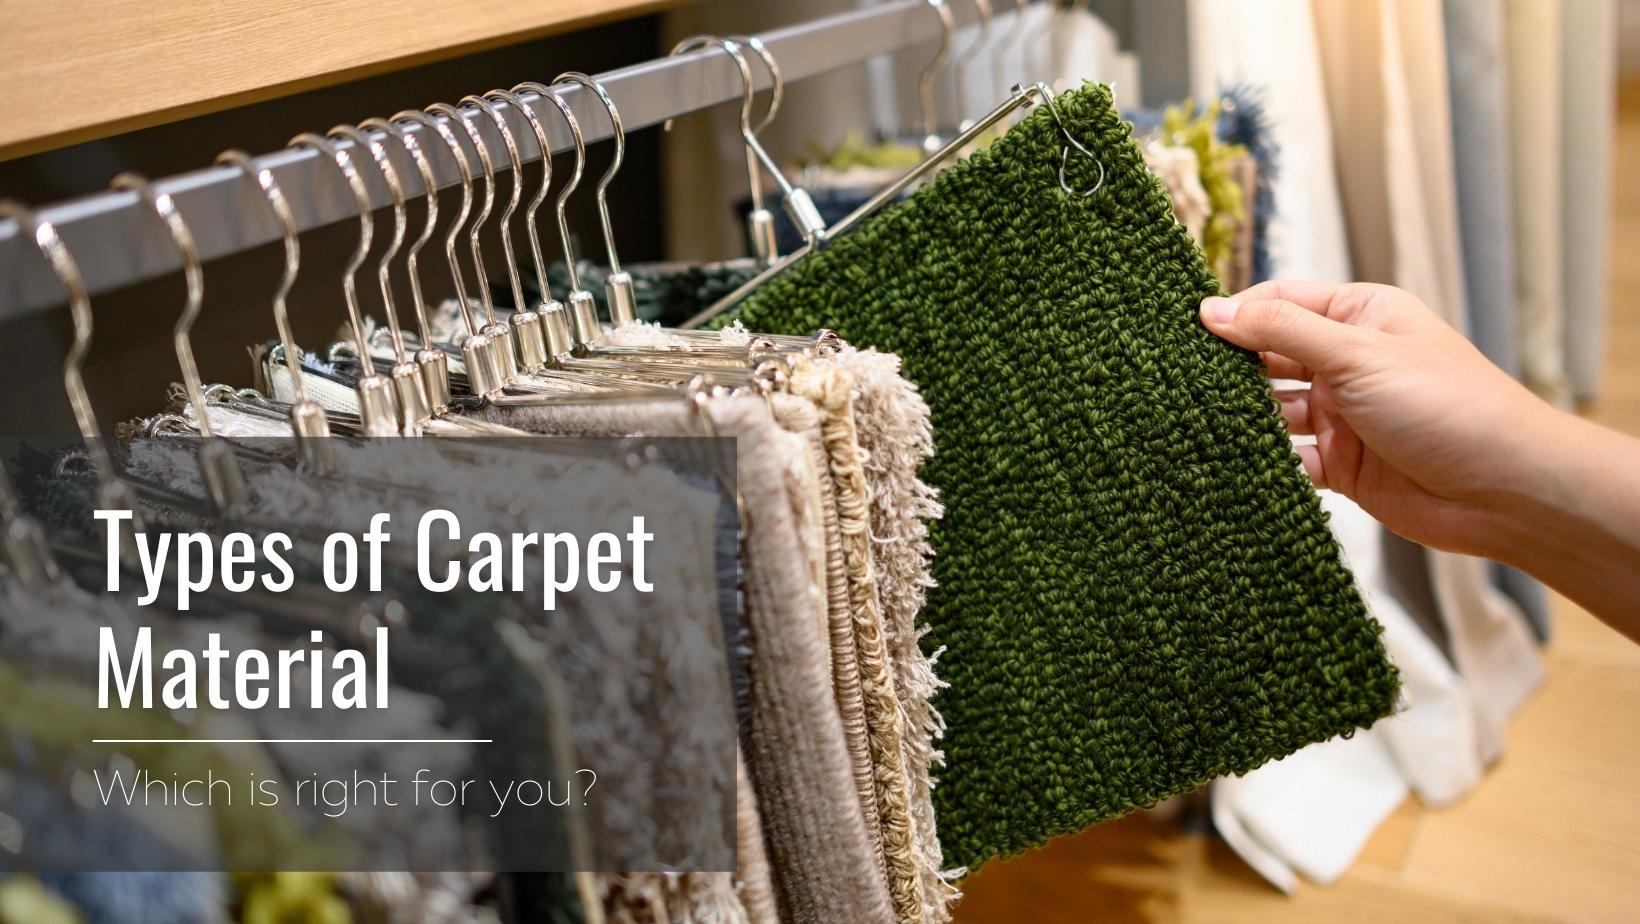 A person picking out carpet and the types of carpet materials